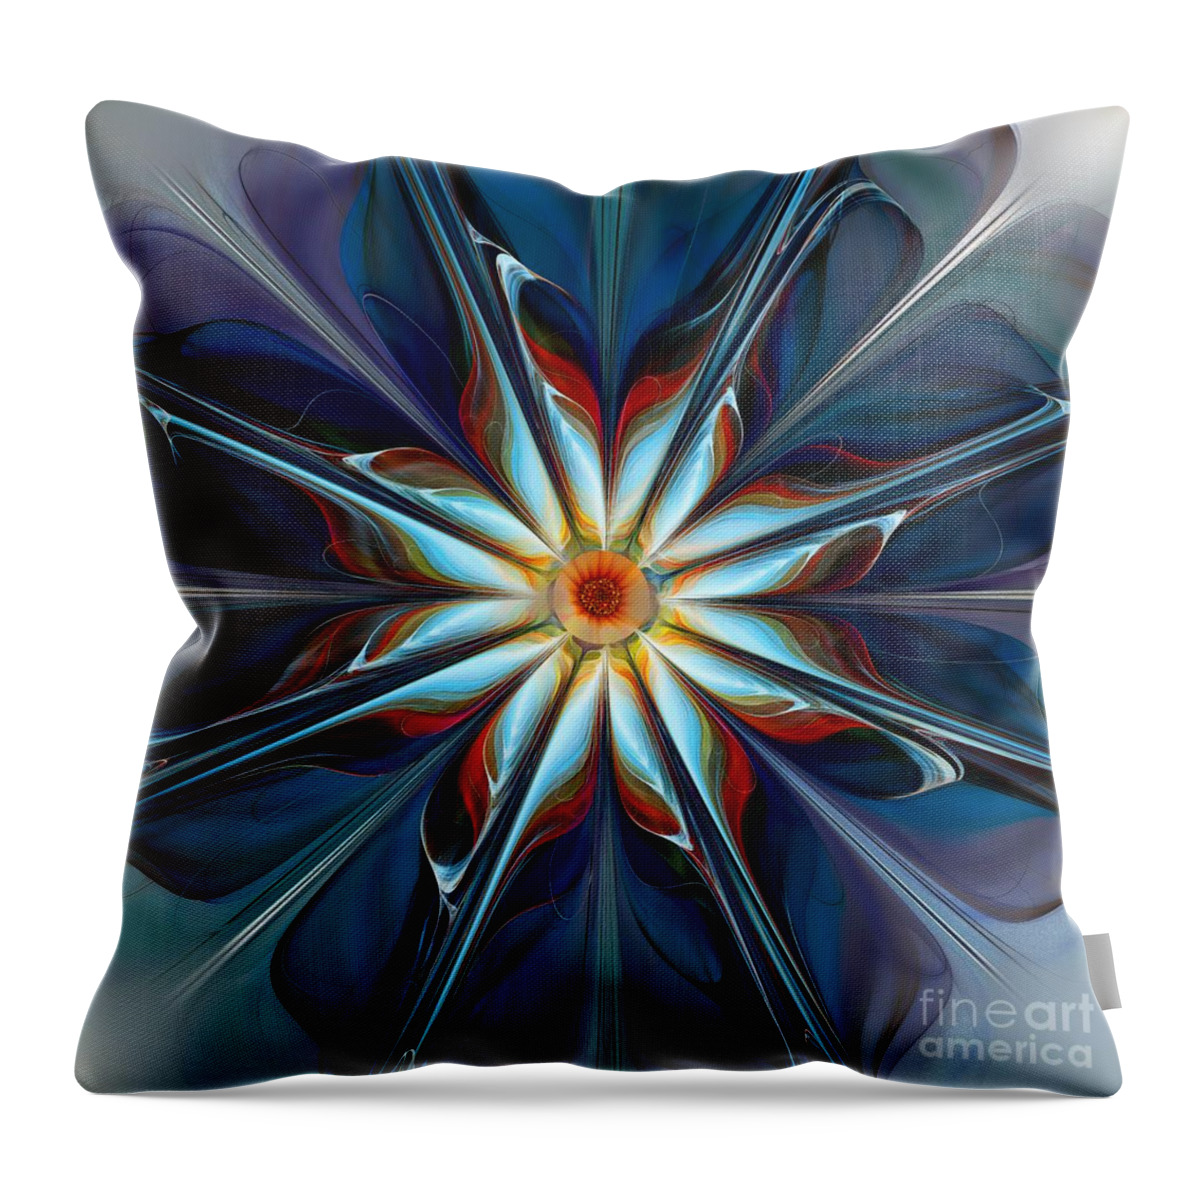 Abstract Throw Pillow featuring the digital art Blue Flower by Klara Acel